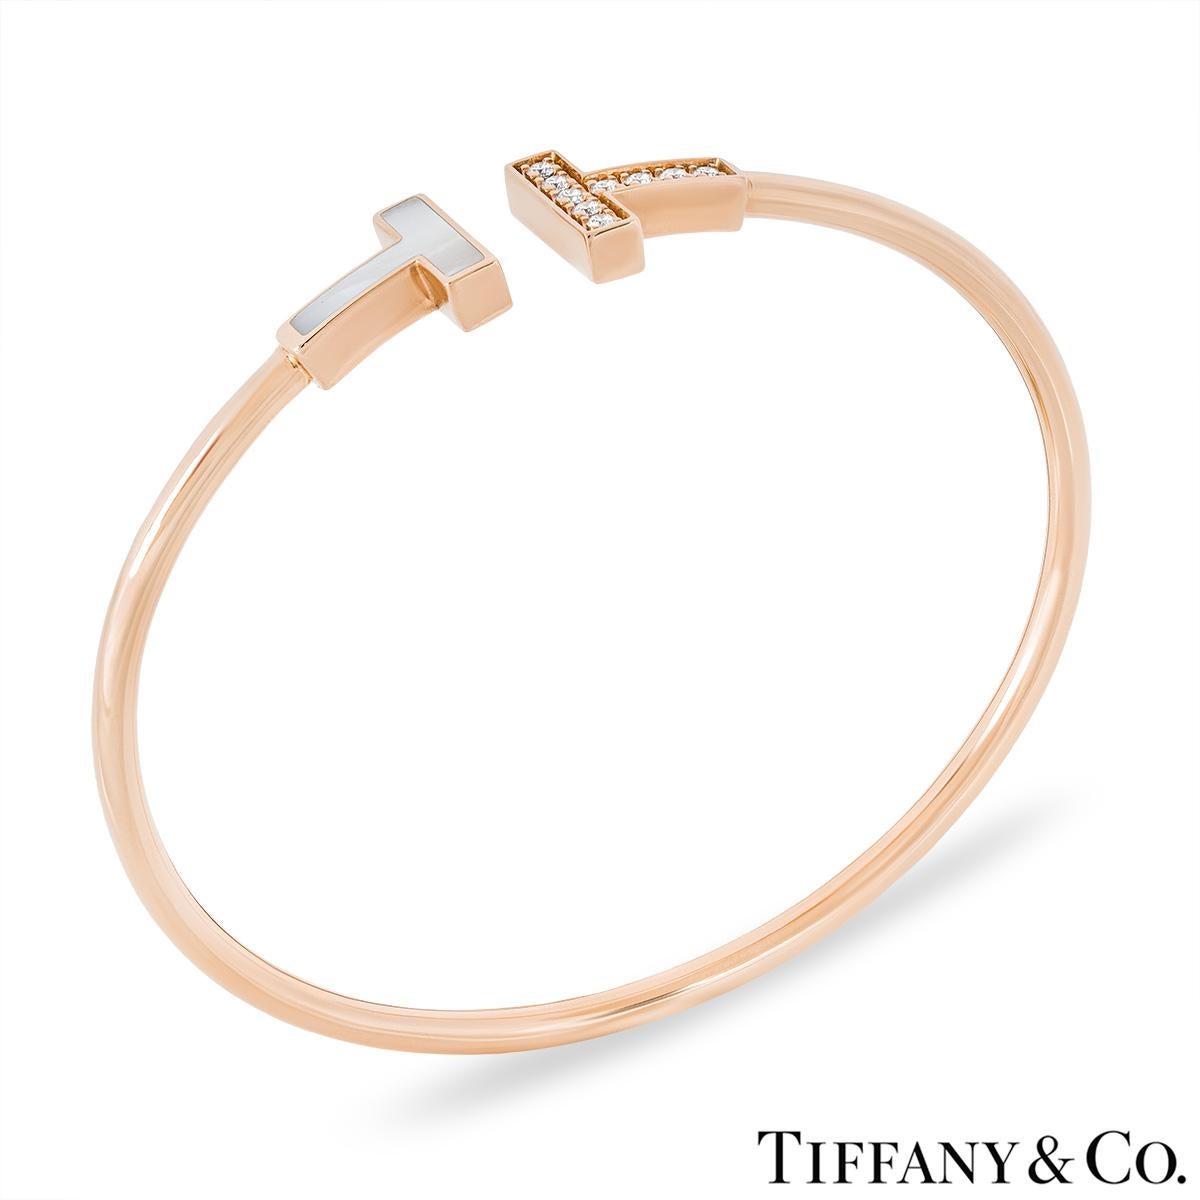 An elegant 18k rose gold mother of pearl and diamond bracelet by Tiffany & Co. from the Tiffany T collection. The cuff style bracelet comprises of two iconic Tiffany T motifs; the first is set with a mother of pearl inlay and the second is set with